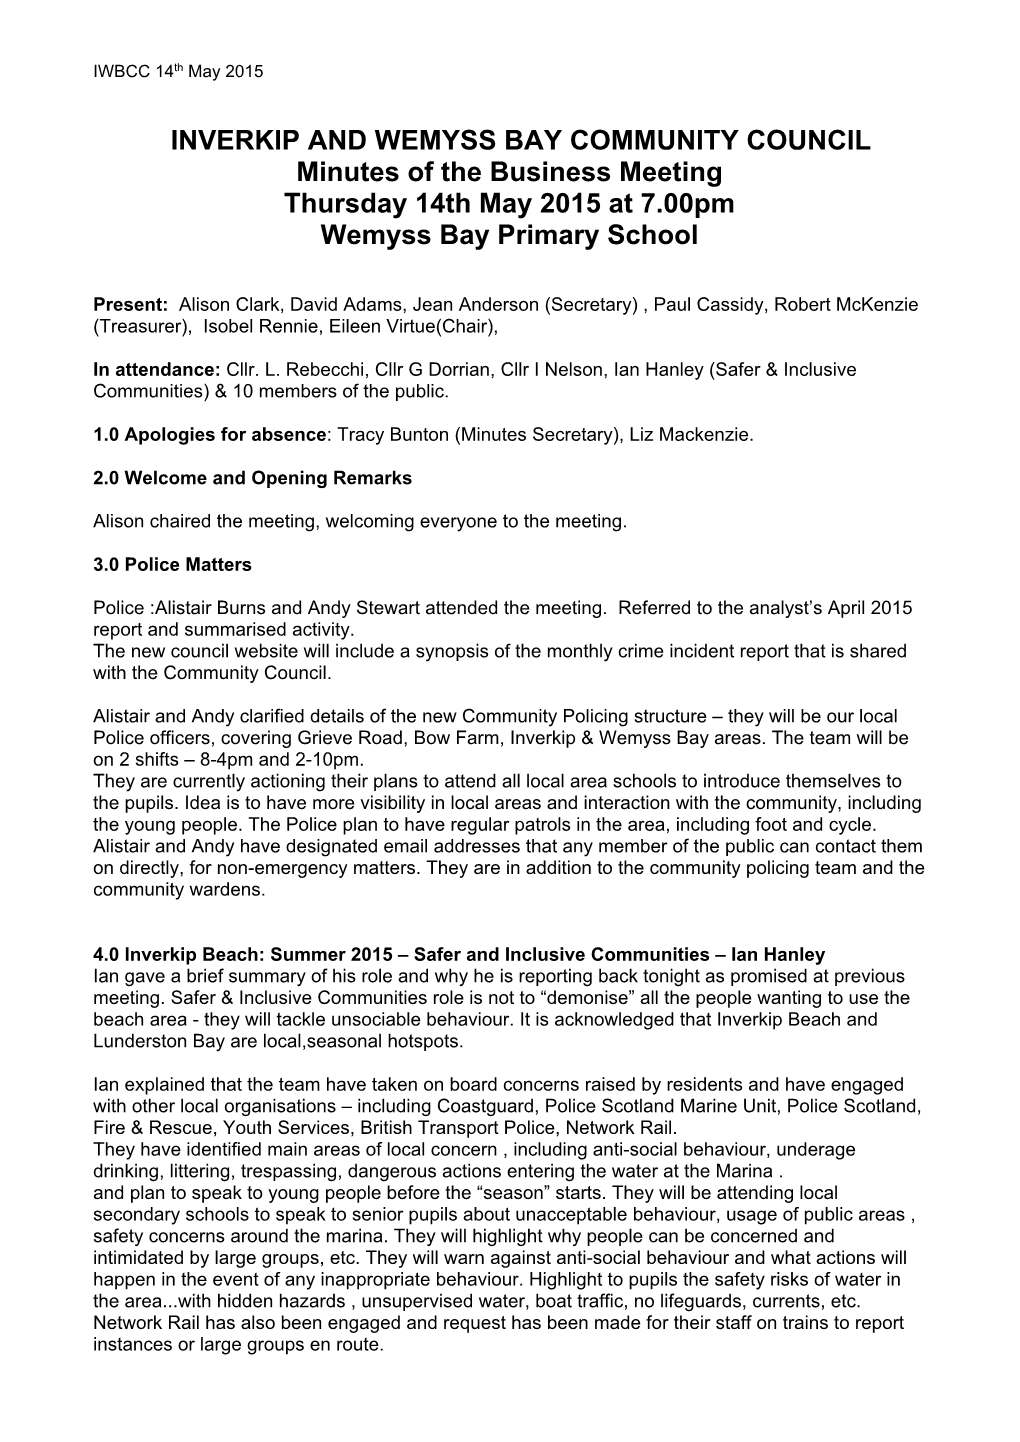 INVERKIP and WEMYSS BAY COMMUNITY COUNCIL Minutes of the Business Meeting Thursday 14Th May 2015 at 7.00Pm Wemyss Bay Primary School